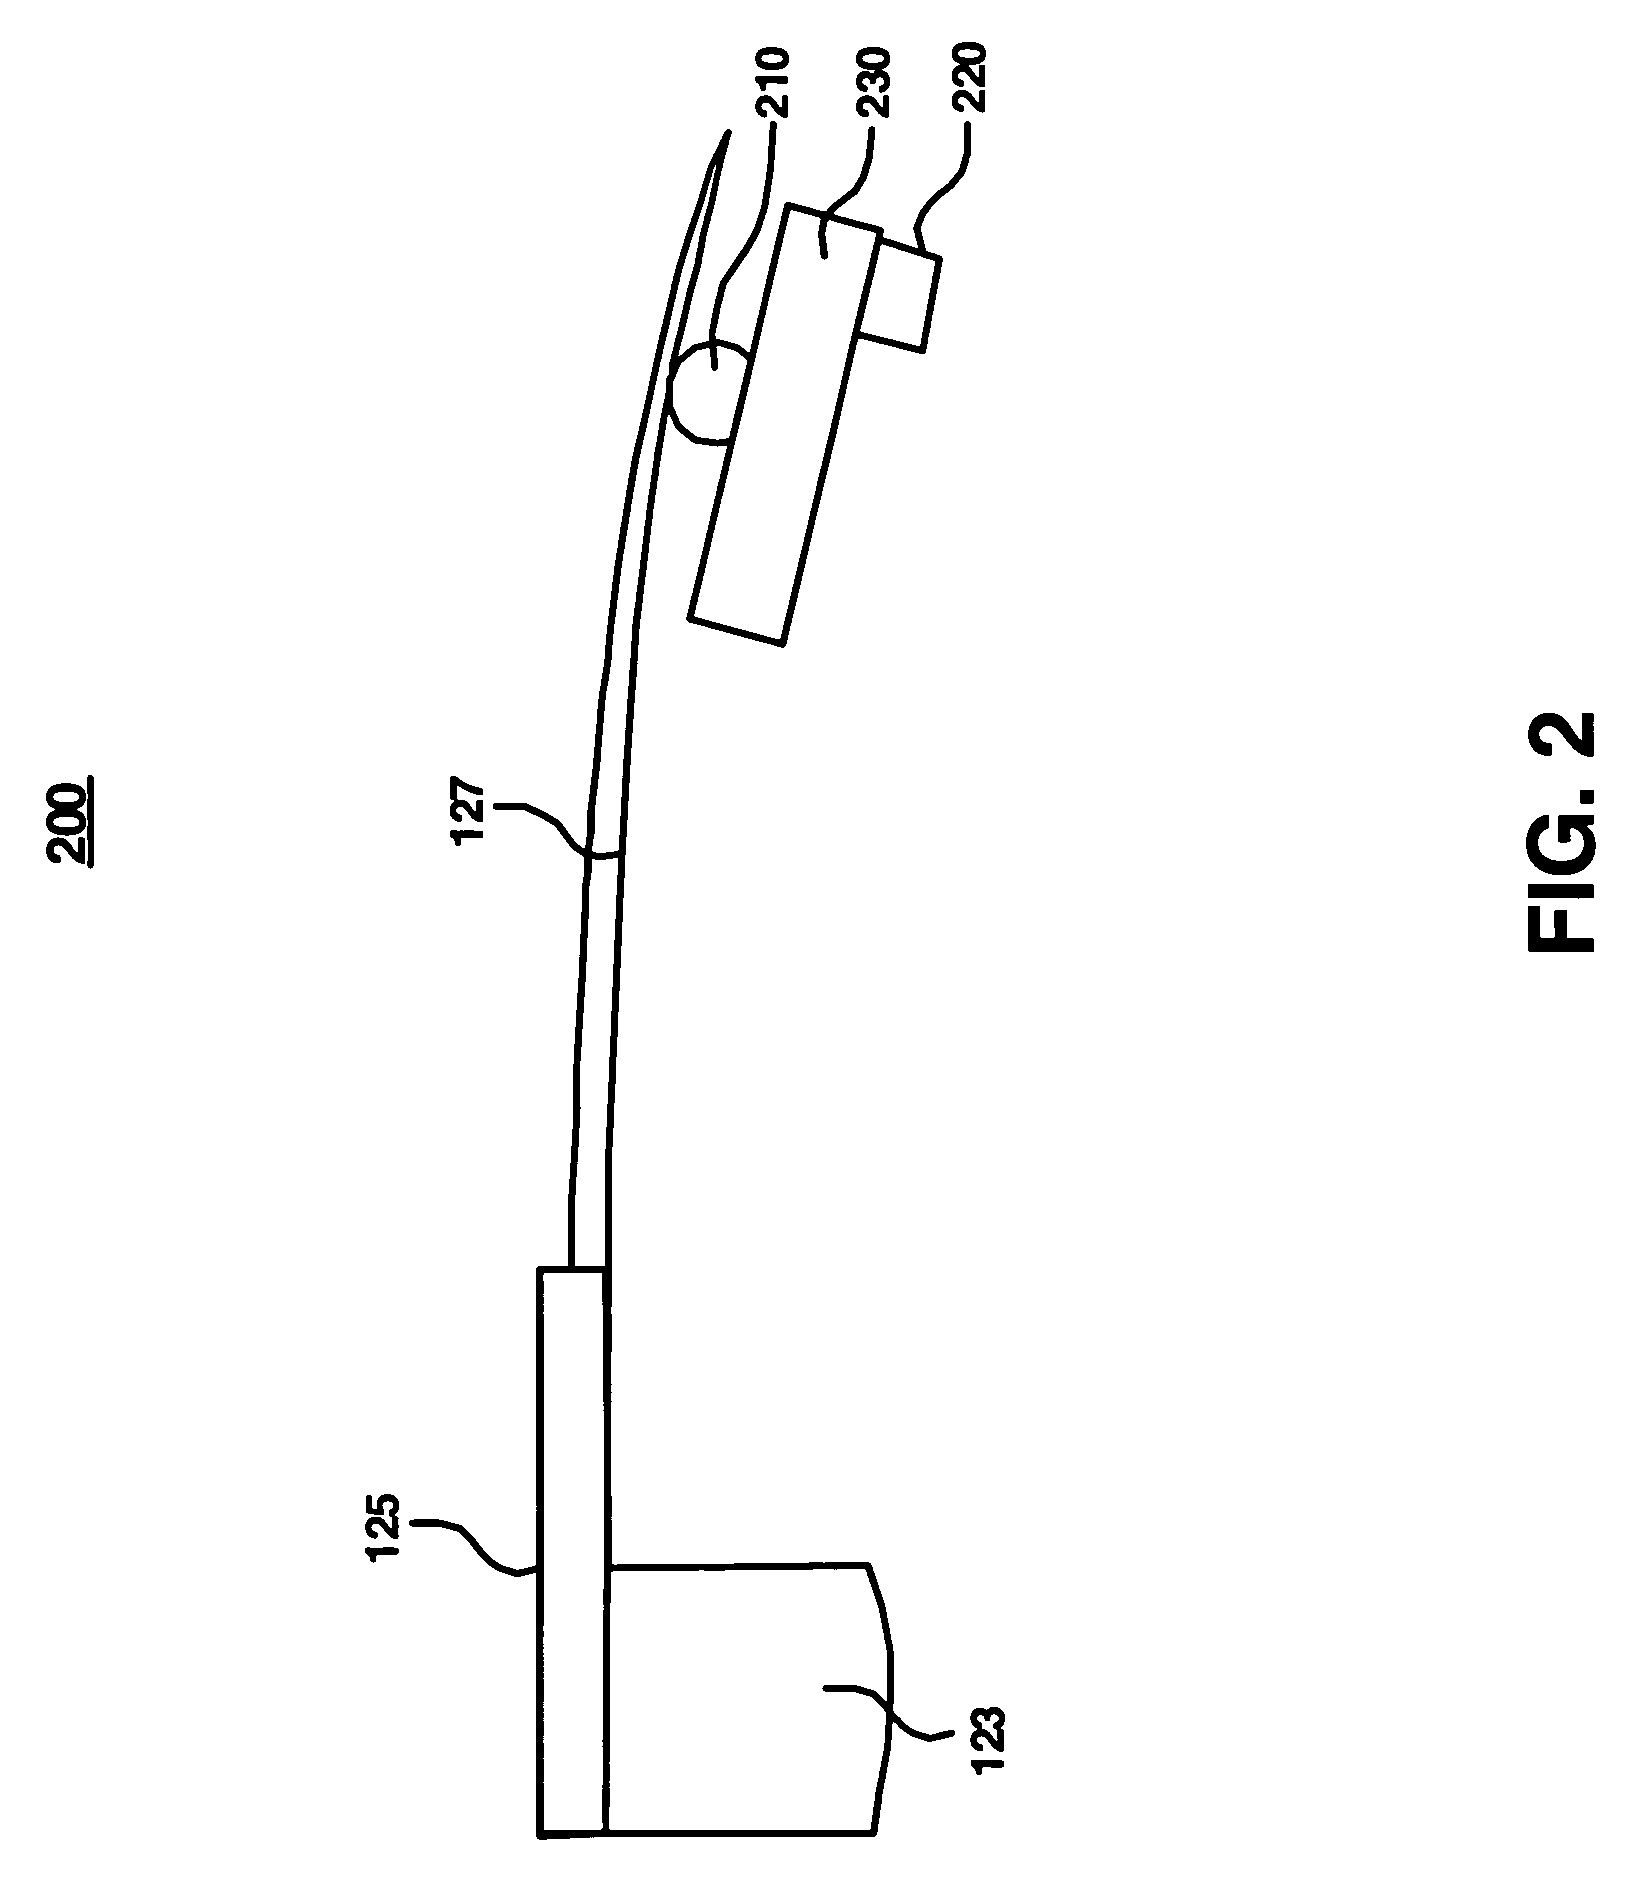 Method and apparatus for optimizing record quality with varying track and linear density by allowing overlapping data tracks